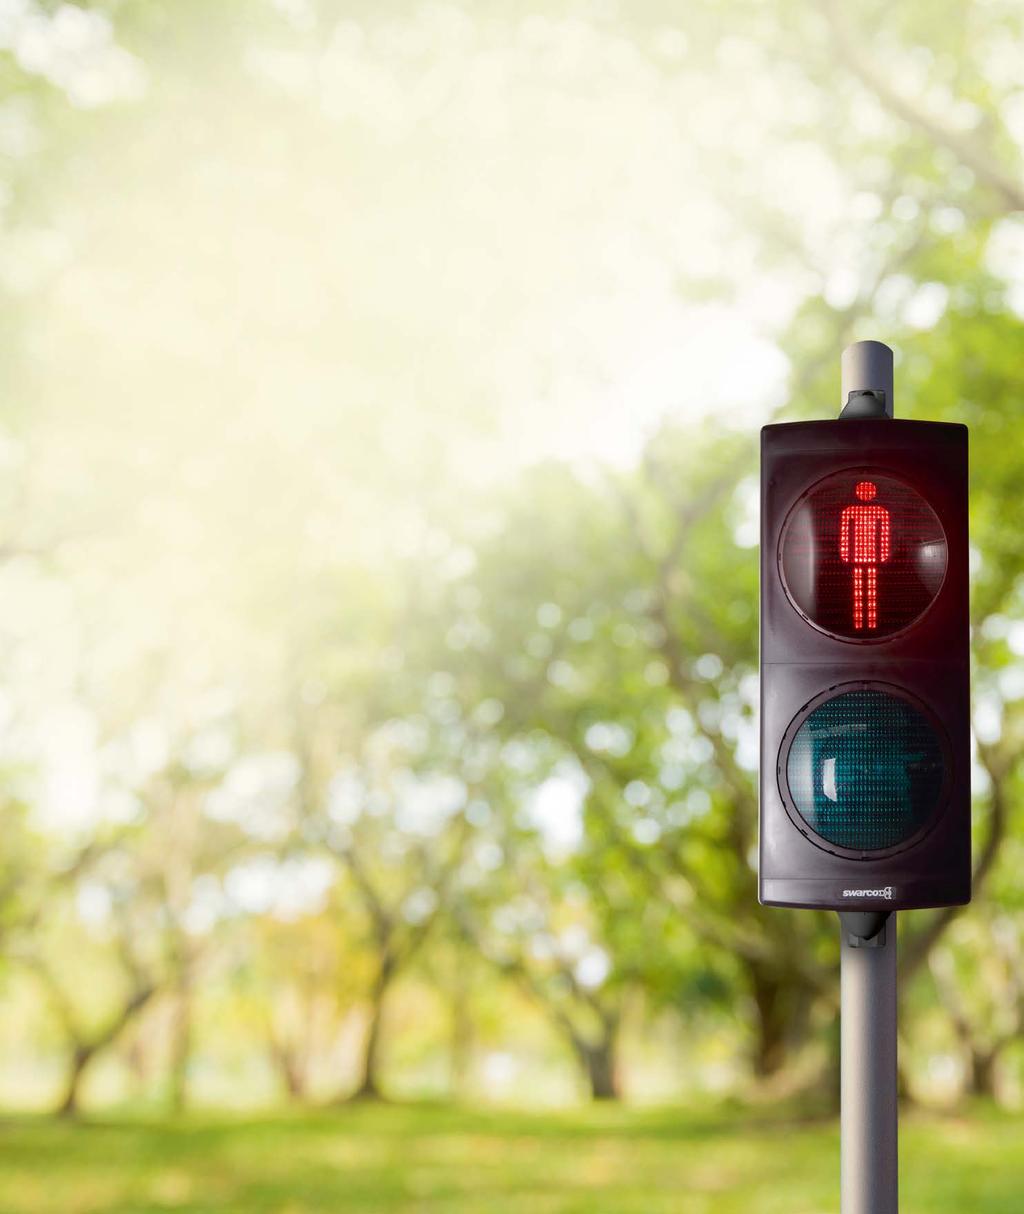 Climate protection in the form of traffic lights. Sustainability is a good designer: Our FUTURA traffic light family has consistently been developed under the eco-design principle.